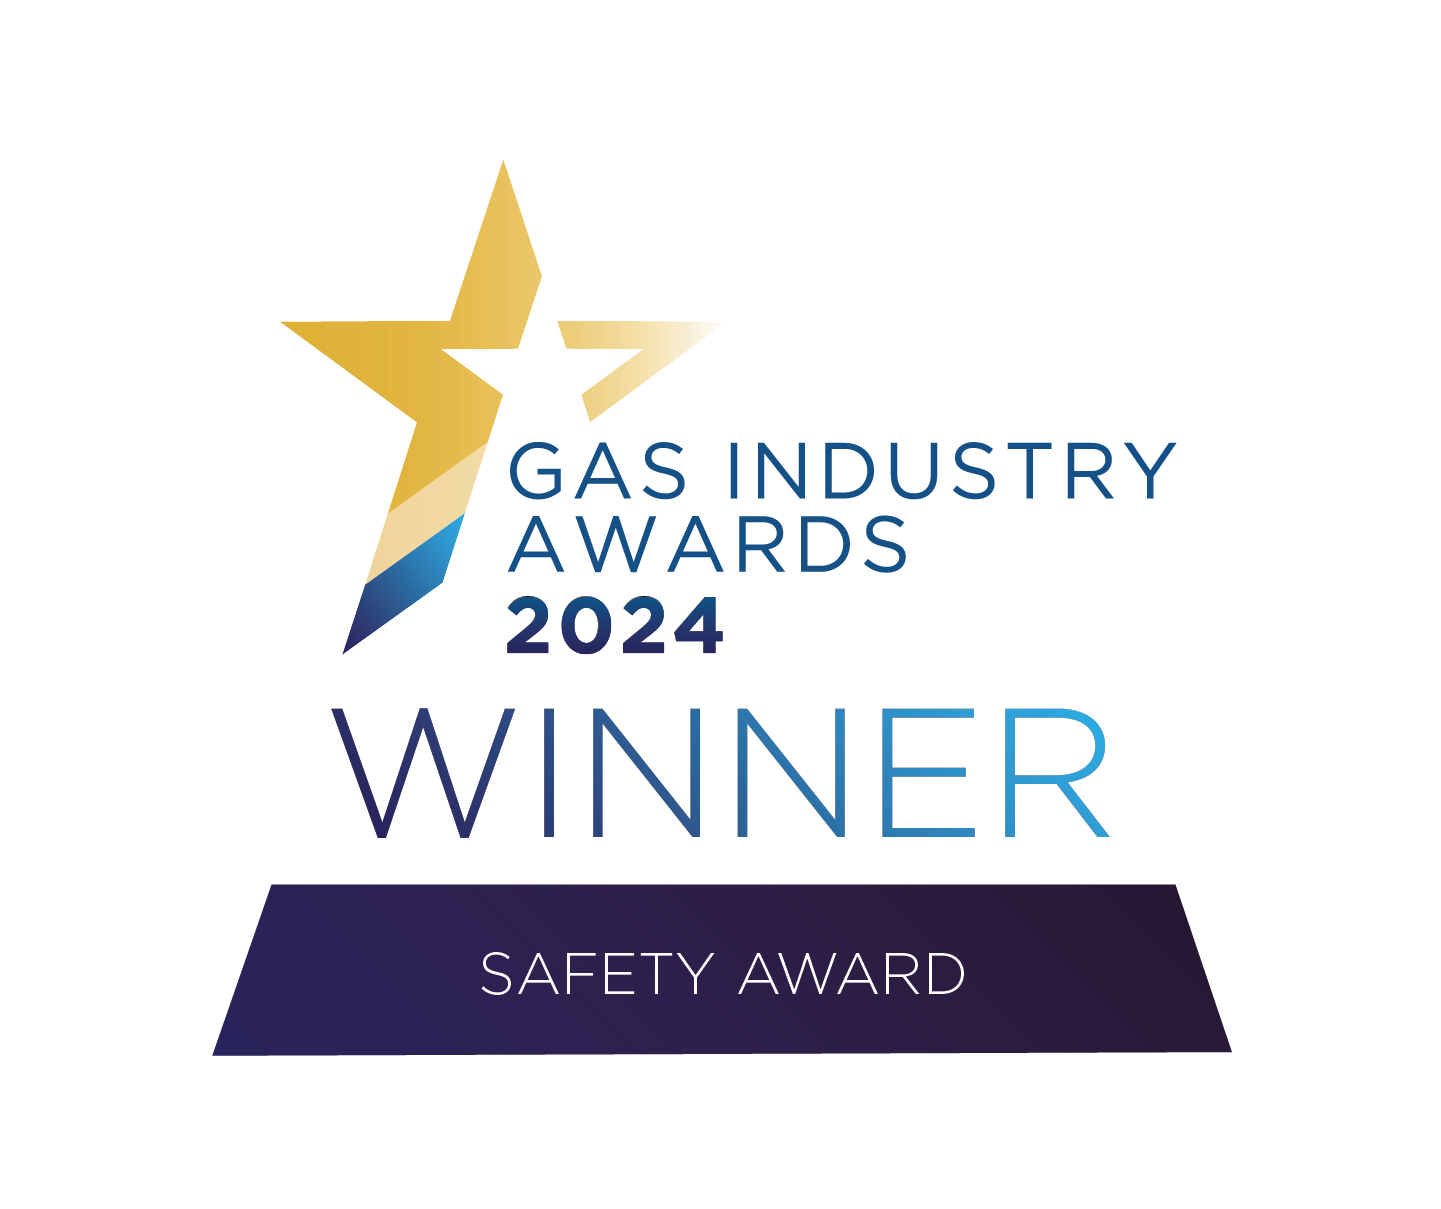 Gas Industry Awards - Safety Award